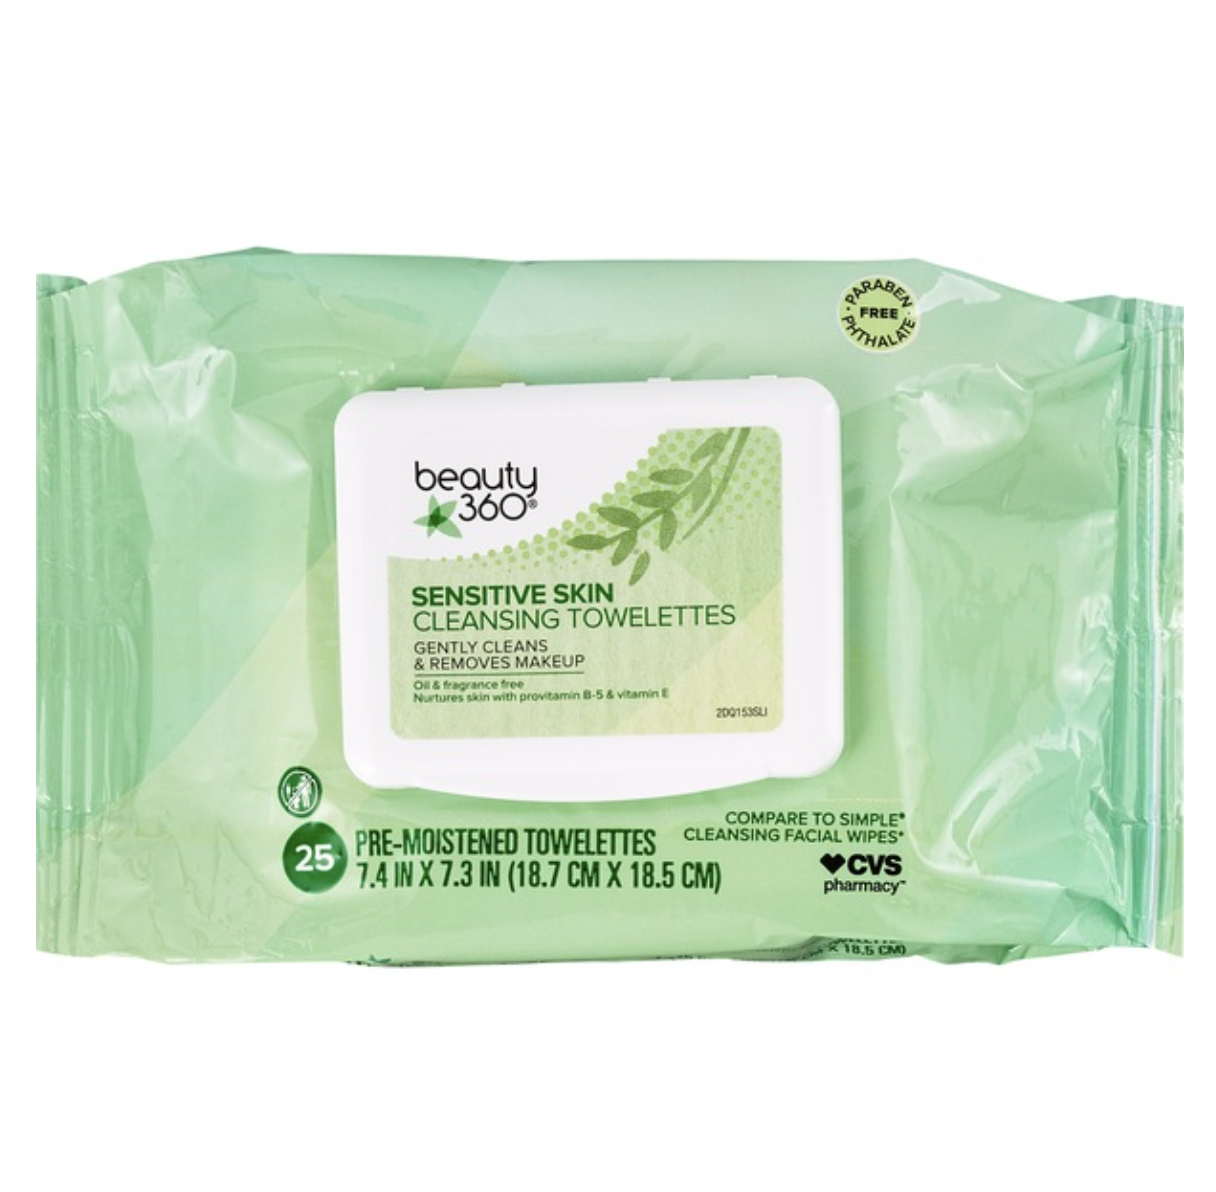 Sensitive skin cleansing towelettes to gently clean and remove makeup